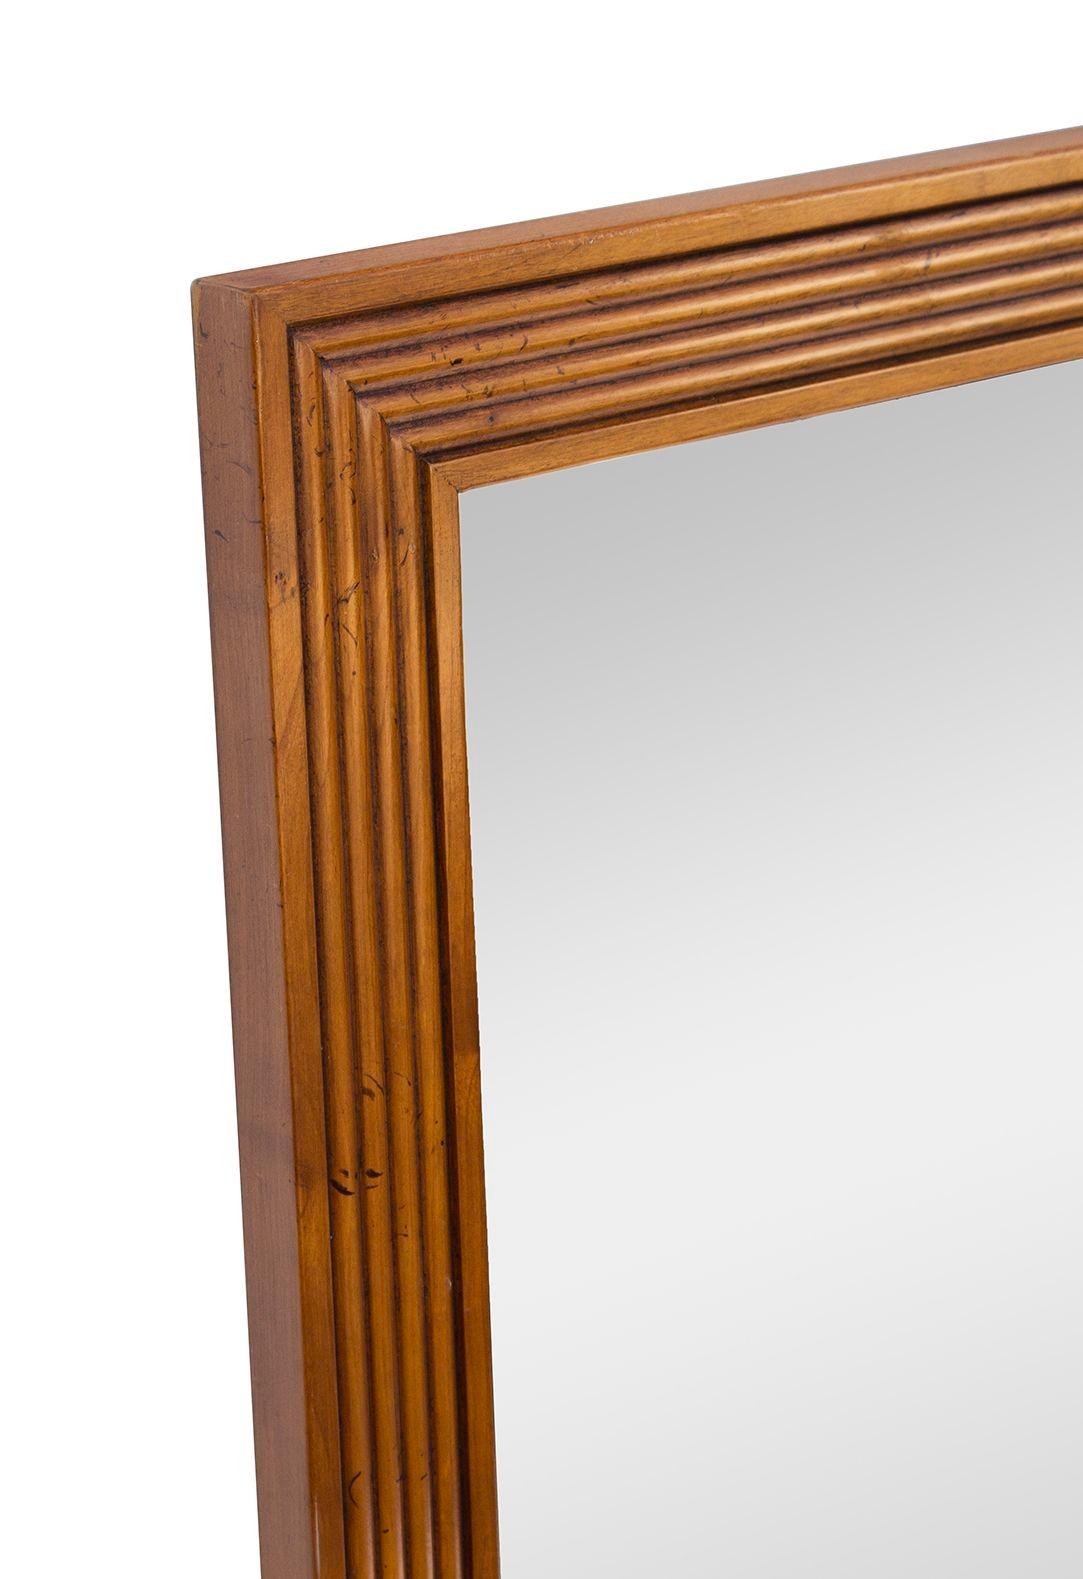 USA, 1970s
Baker Furniture / Milling Road stepped or beveled mirror in a large size- 34 x 44. This piece is both substantial and well made. It offers a nice combination of quality, simplicity, and visual interest. The quality is vintage but the